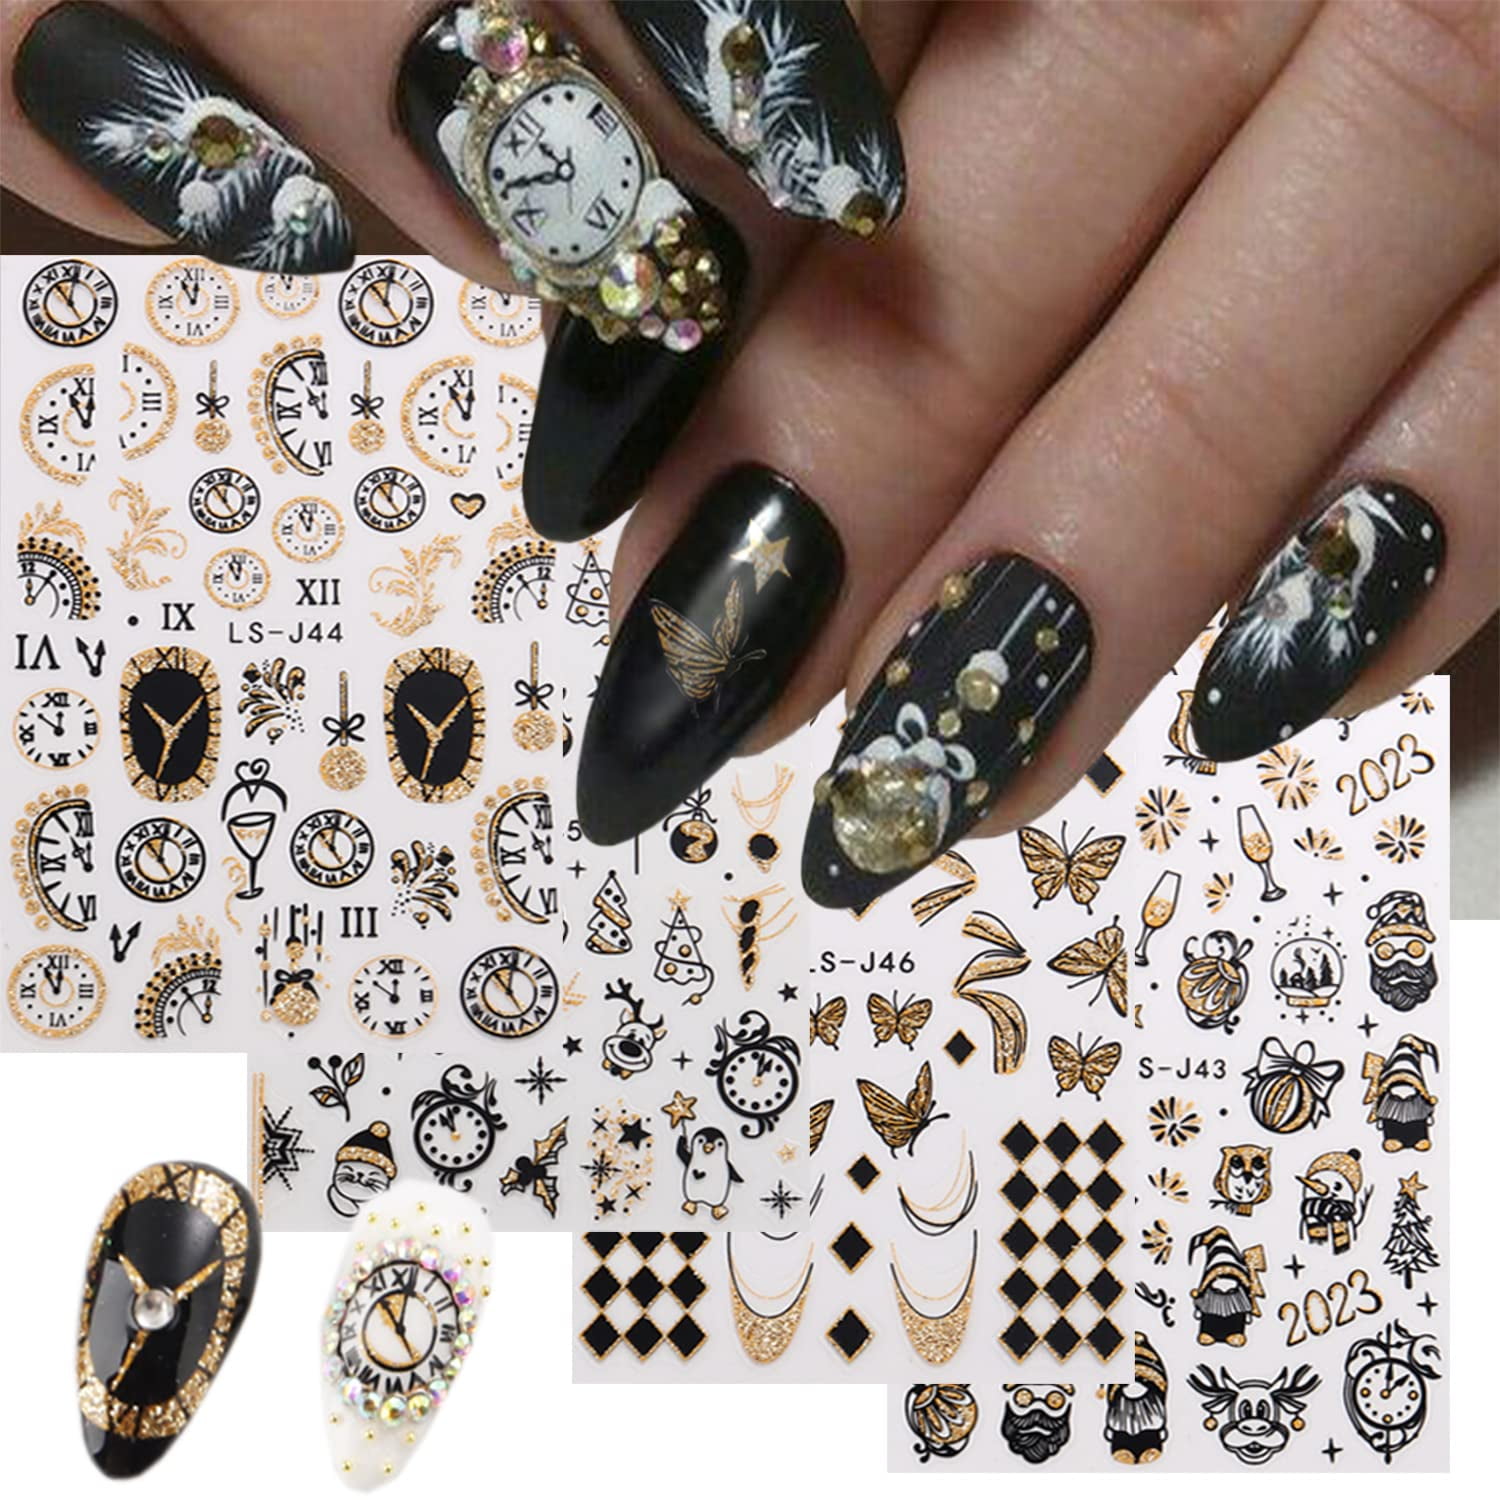 22 New Years Eve Nail Art Designs And Ideas